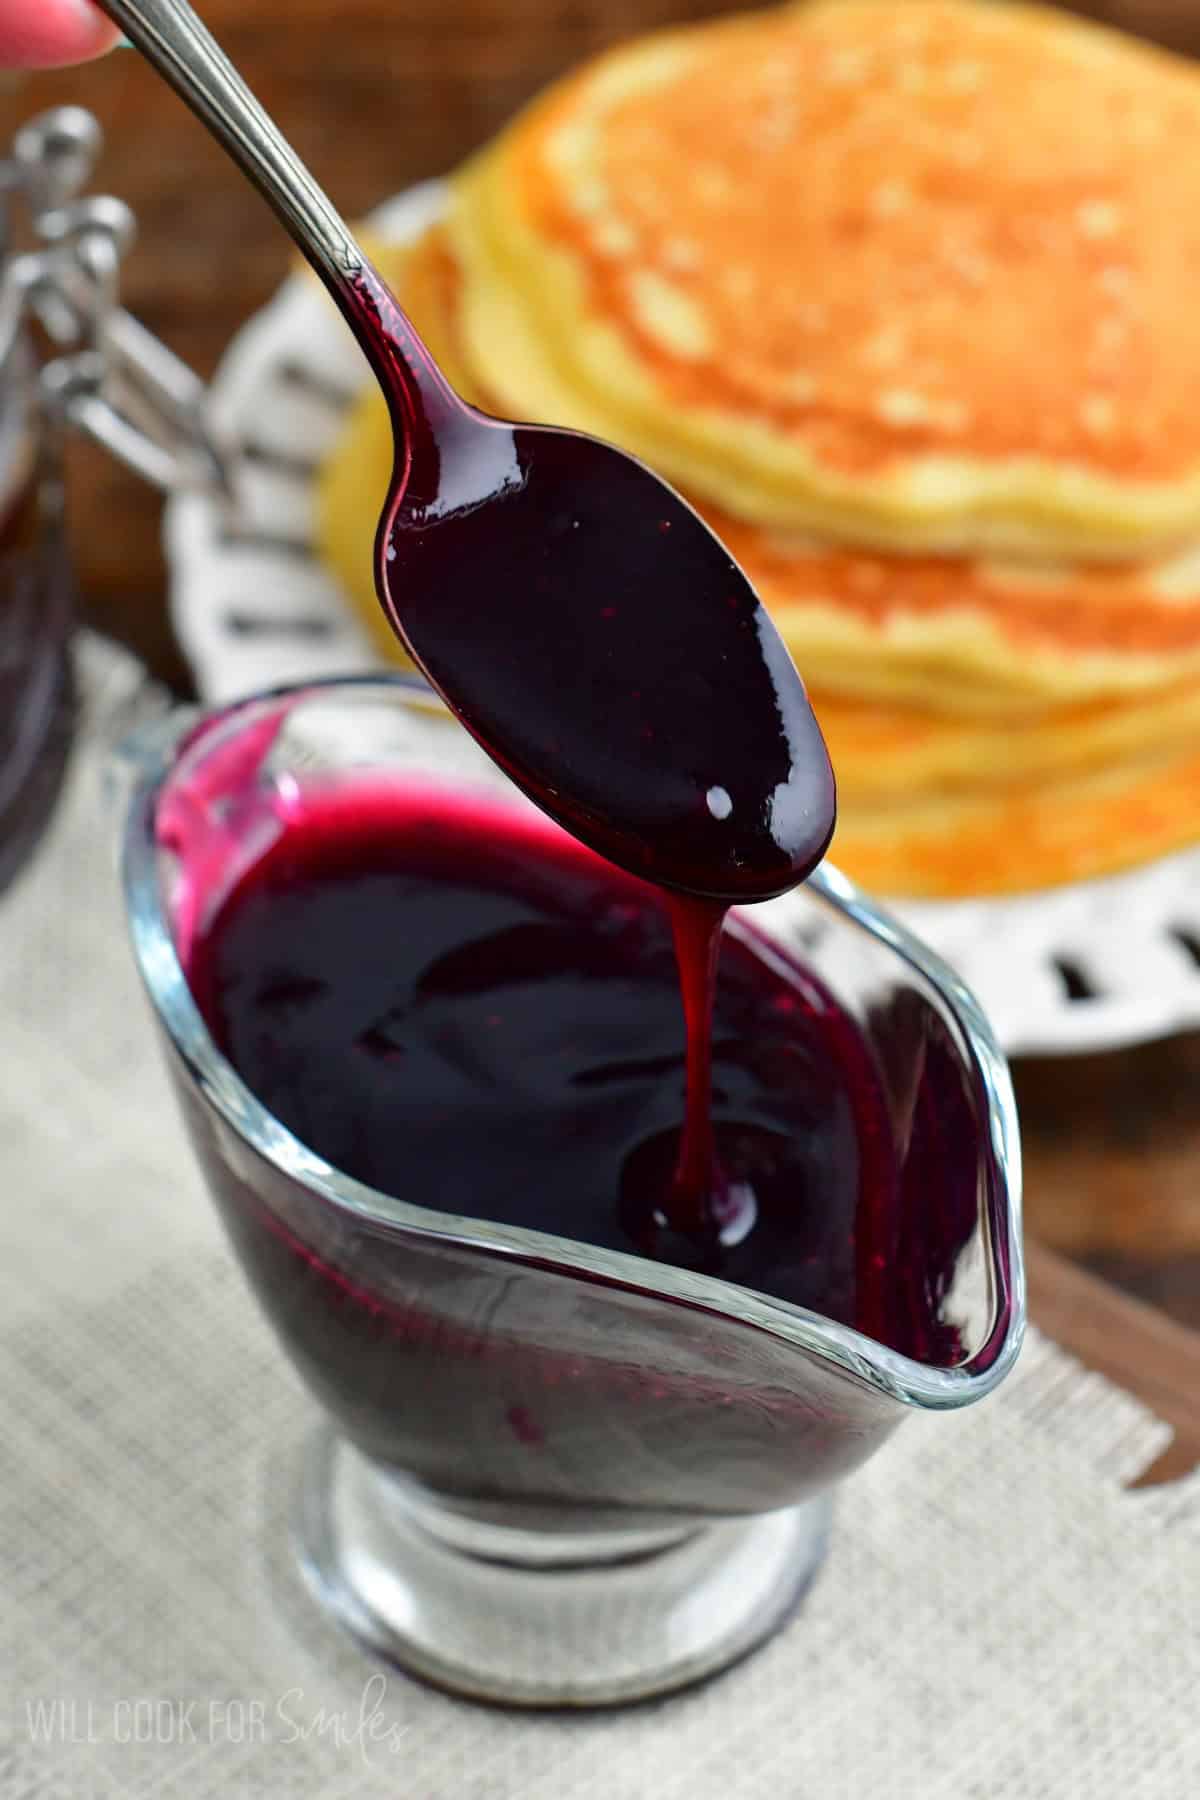 blueberry syrup pouring off spoon into the saucer cup.